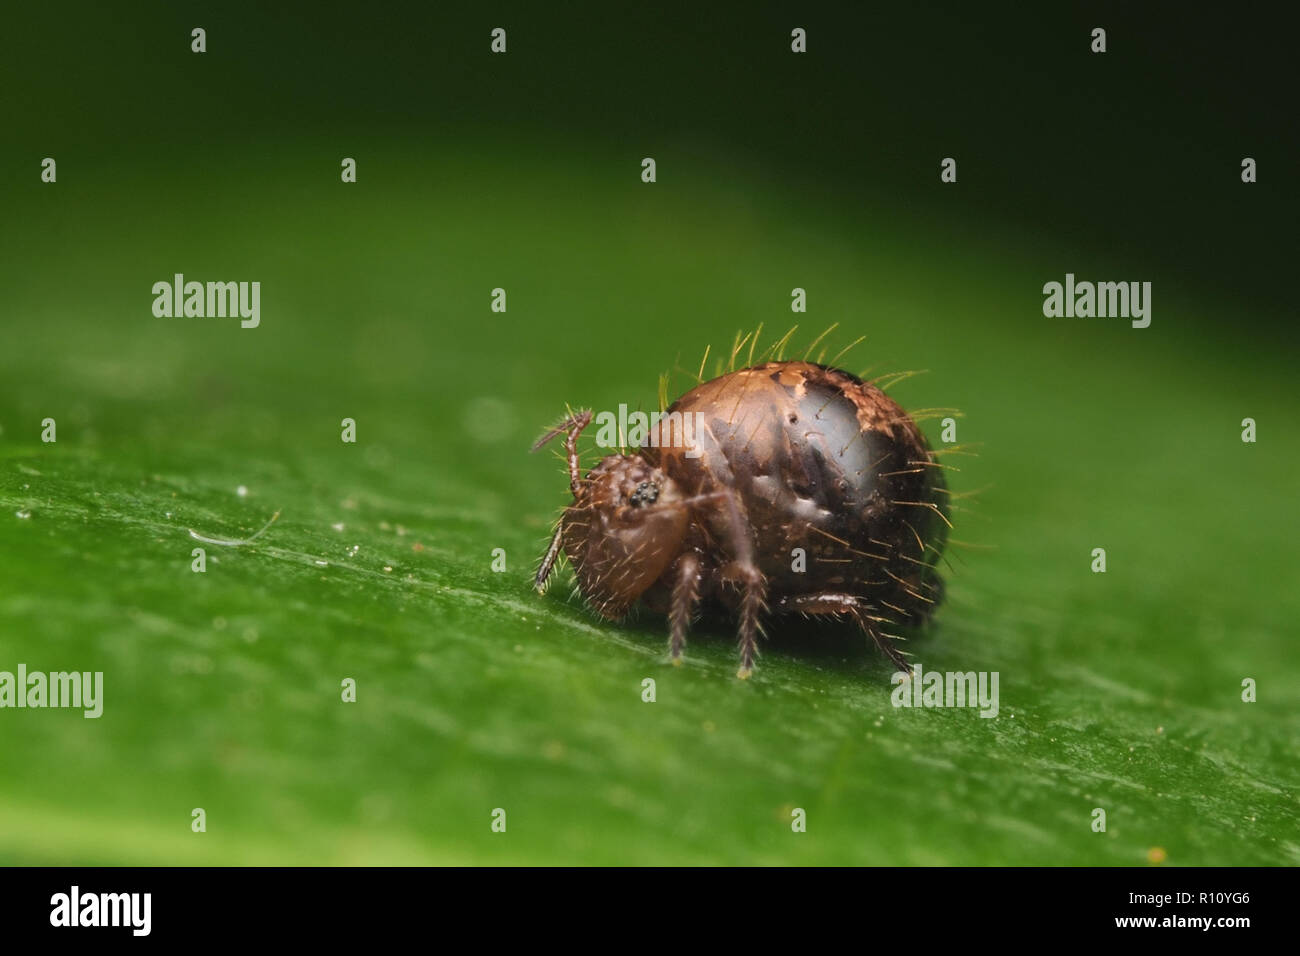 Globular Springtail (Allacma fusca) resting on rhododendron leaf. Tipperary, Ireland Stock Photo